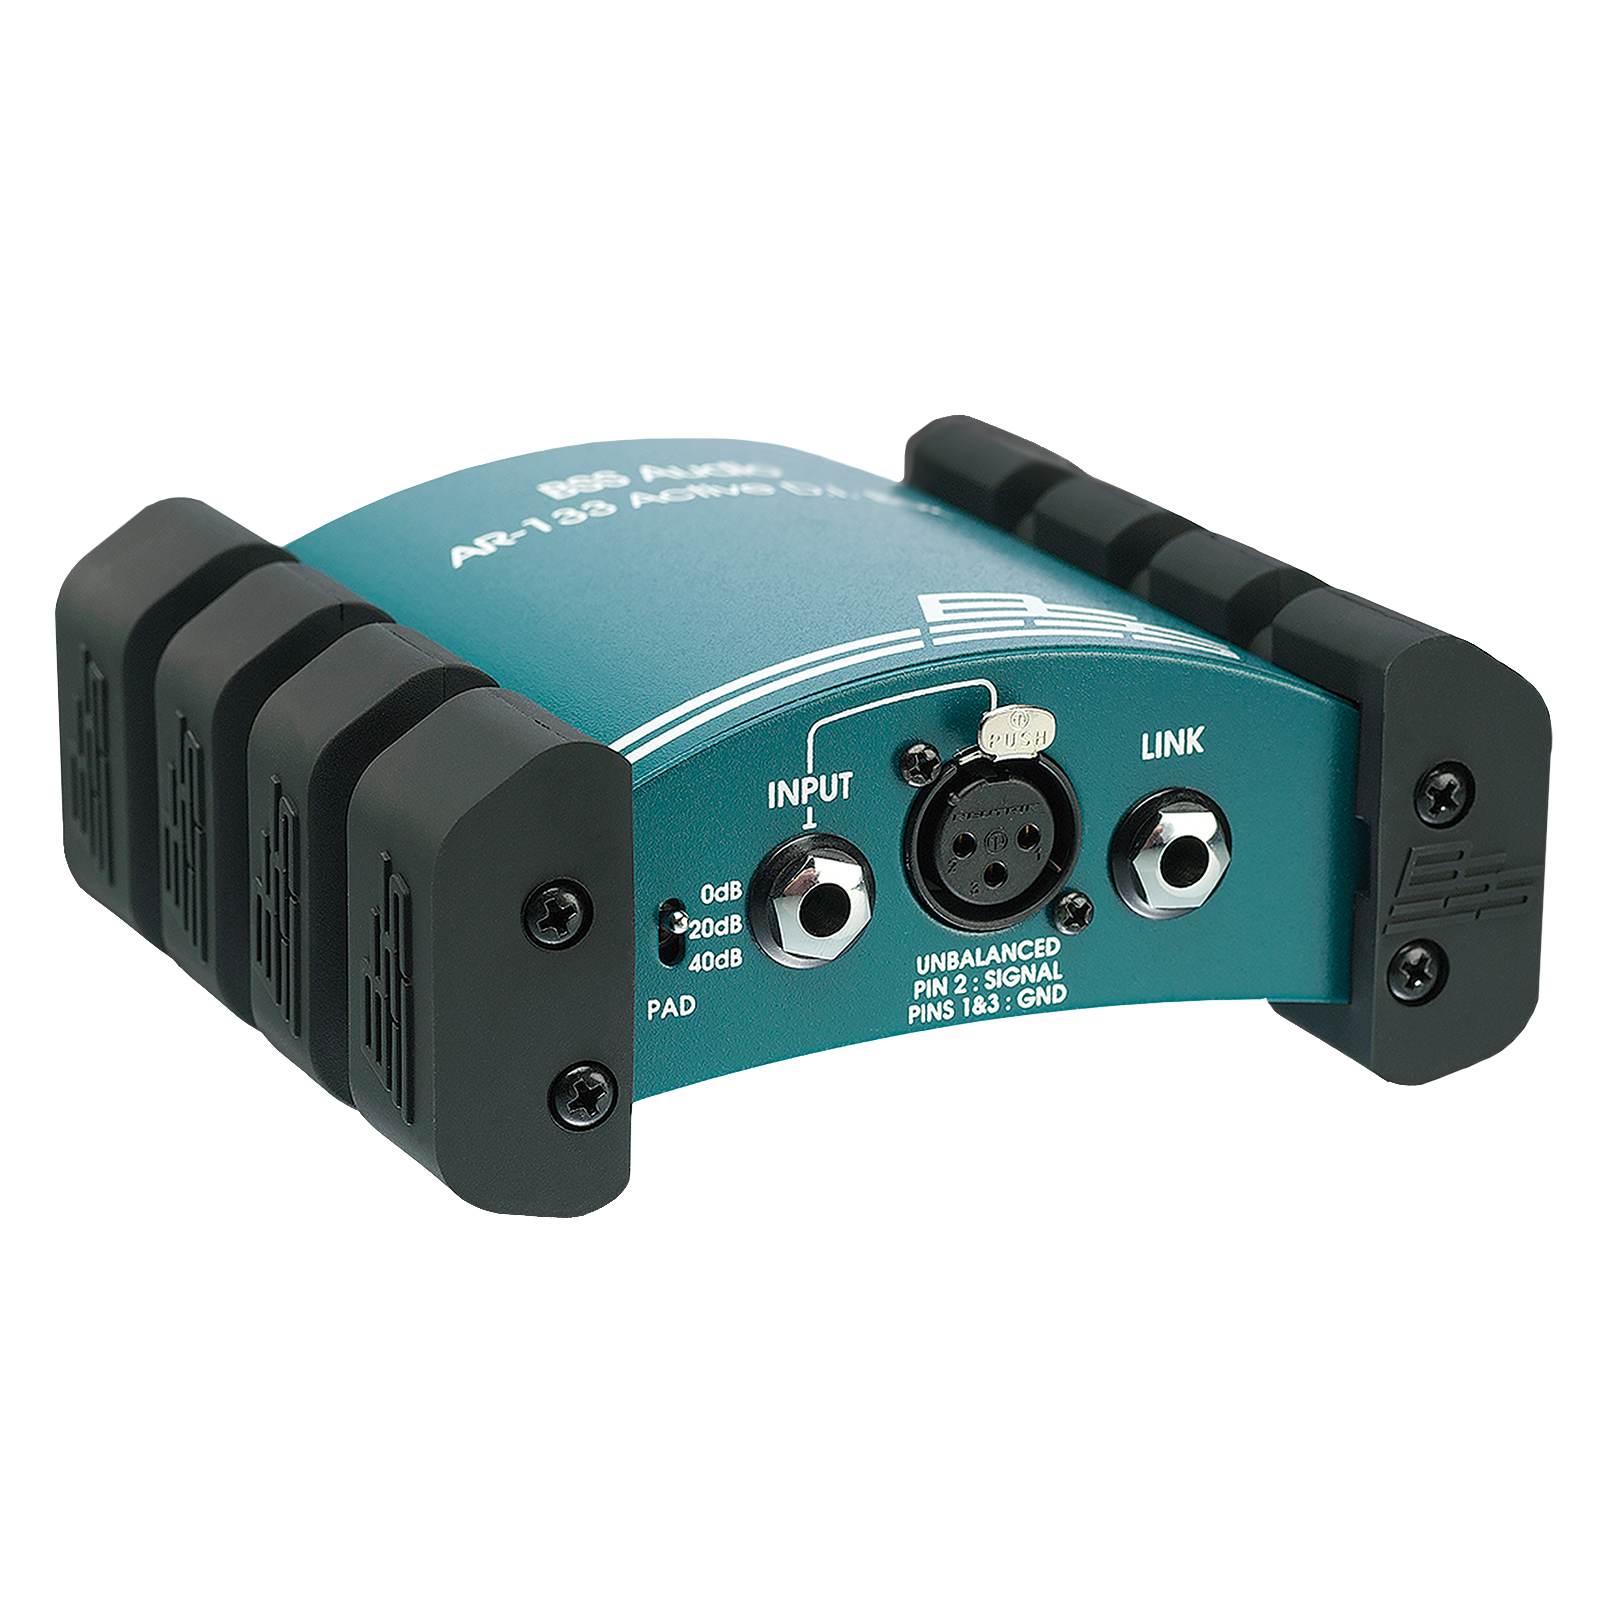 BSS AR-133 Active DI Box - Green - Rugged construction and clear tone. - Hero